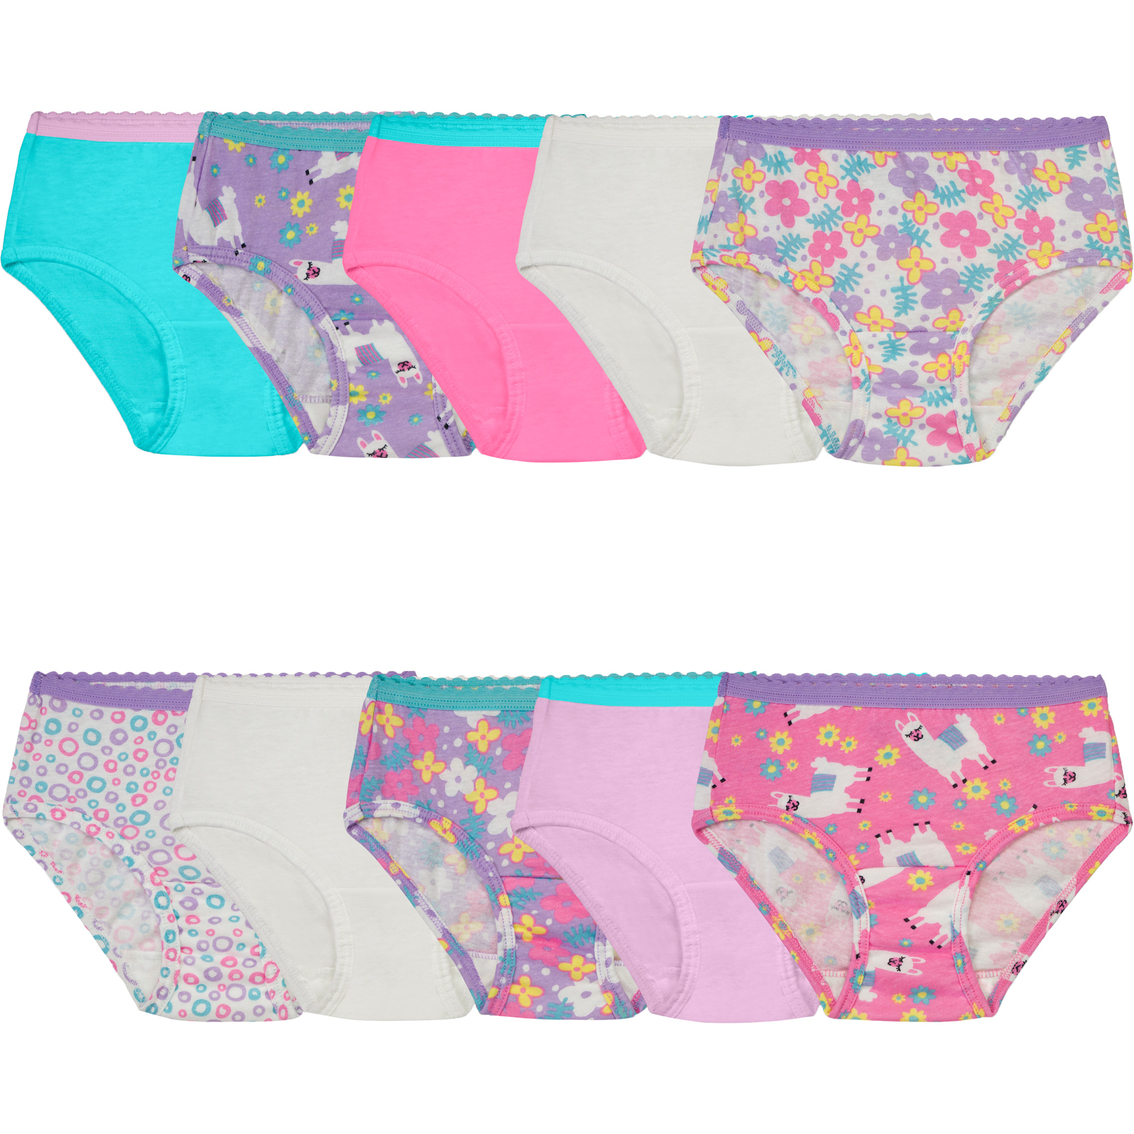 Fruit Of The Loom Toddler Girls Brief Panty 10 Pk., Toddler Girls 2t-5t, Clothing & Accessories